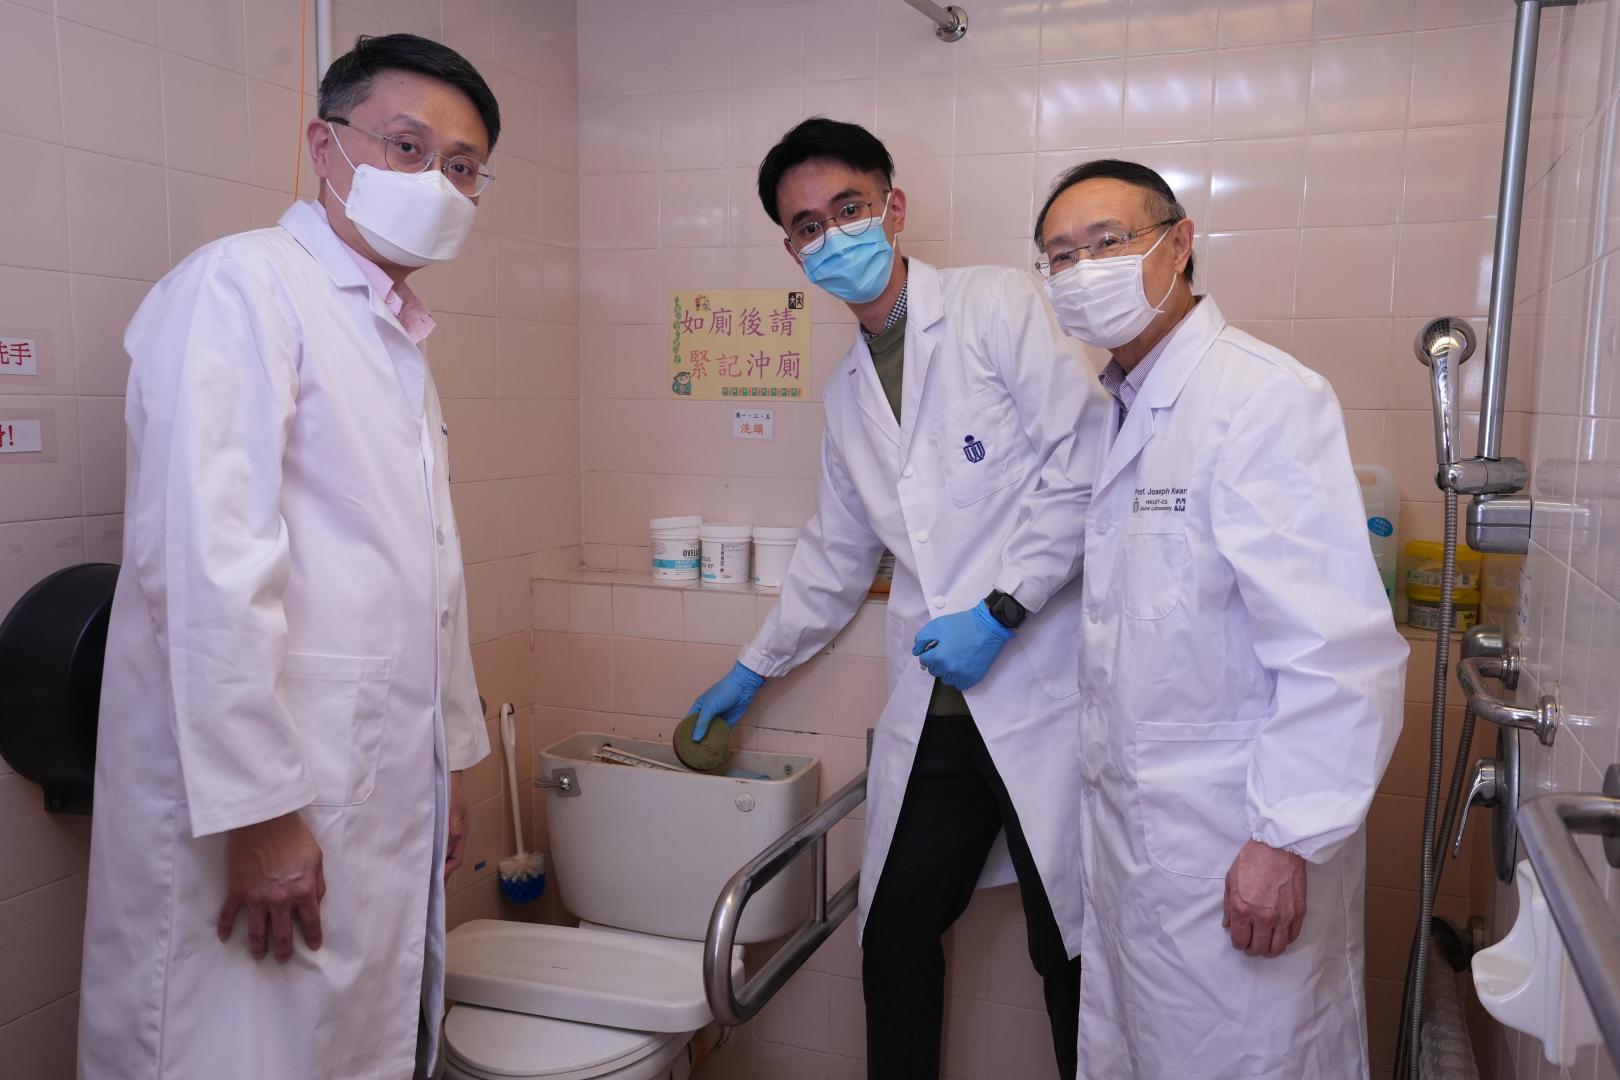 Prof. YEUNG King-Lun (first left) and Prof. Joseph Kwan (first right), inspected the trial of AMGel in an elderly home under HOHCS.